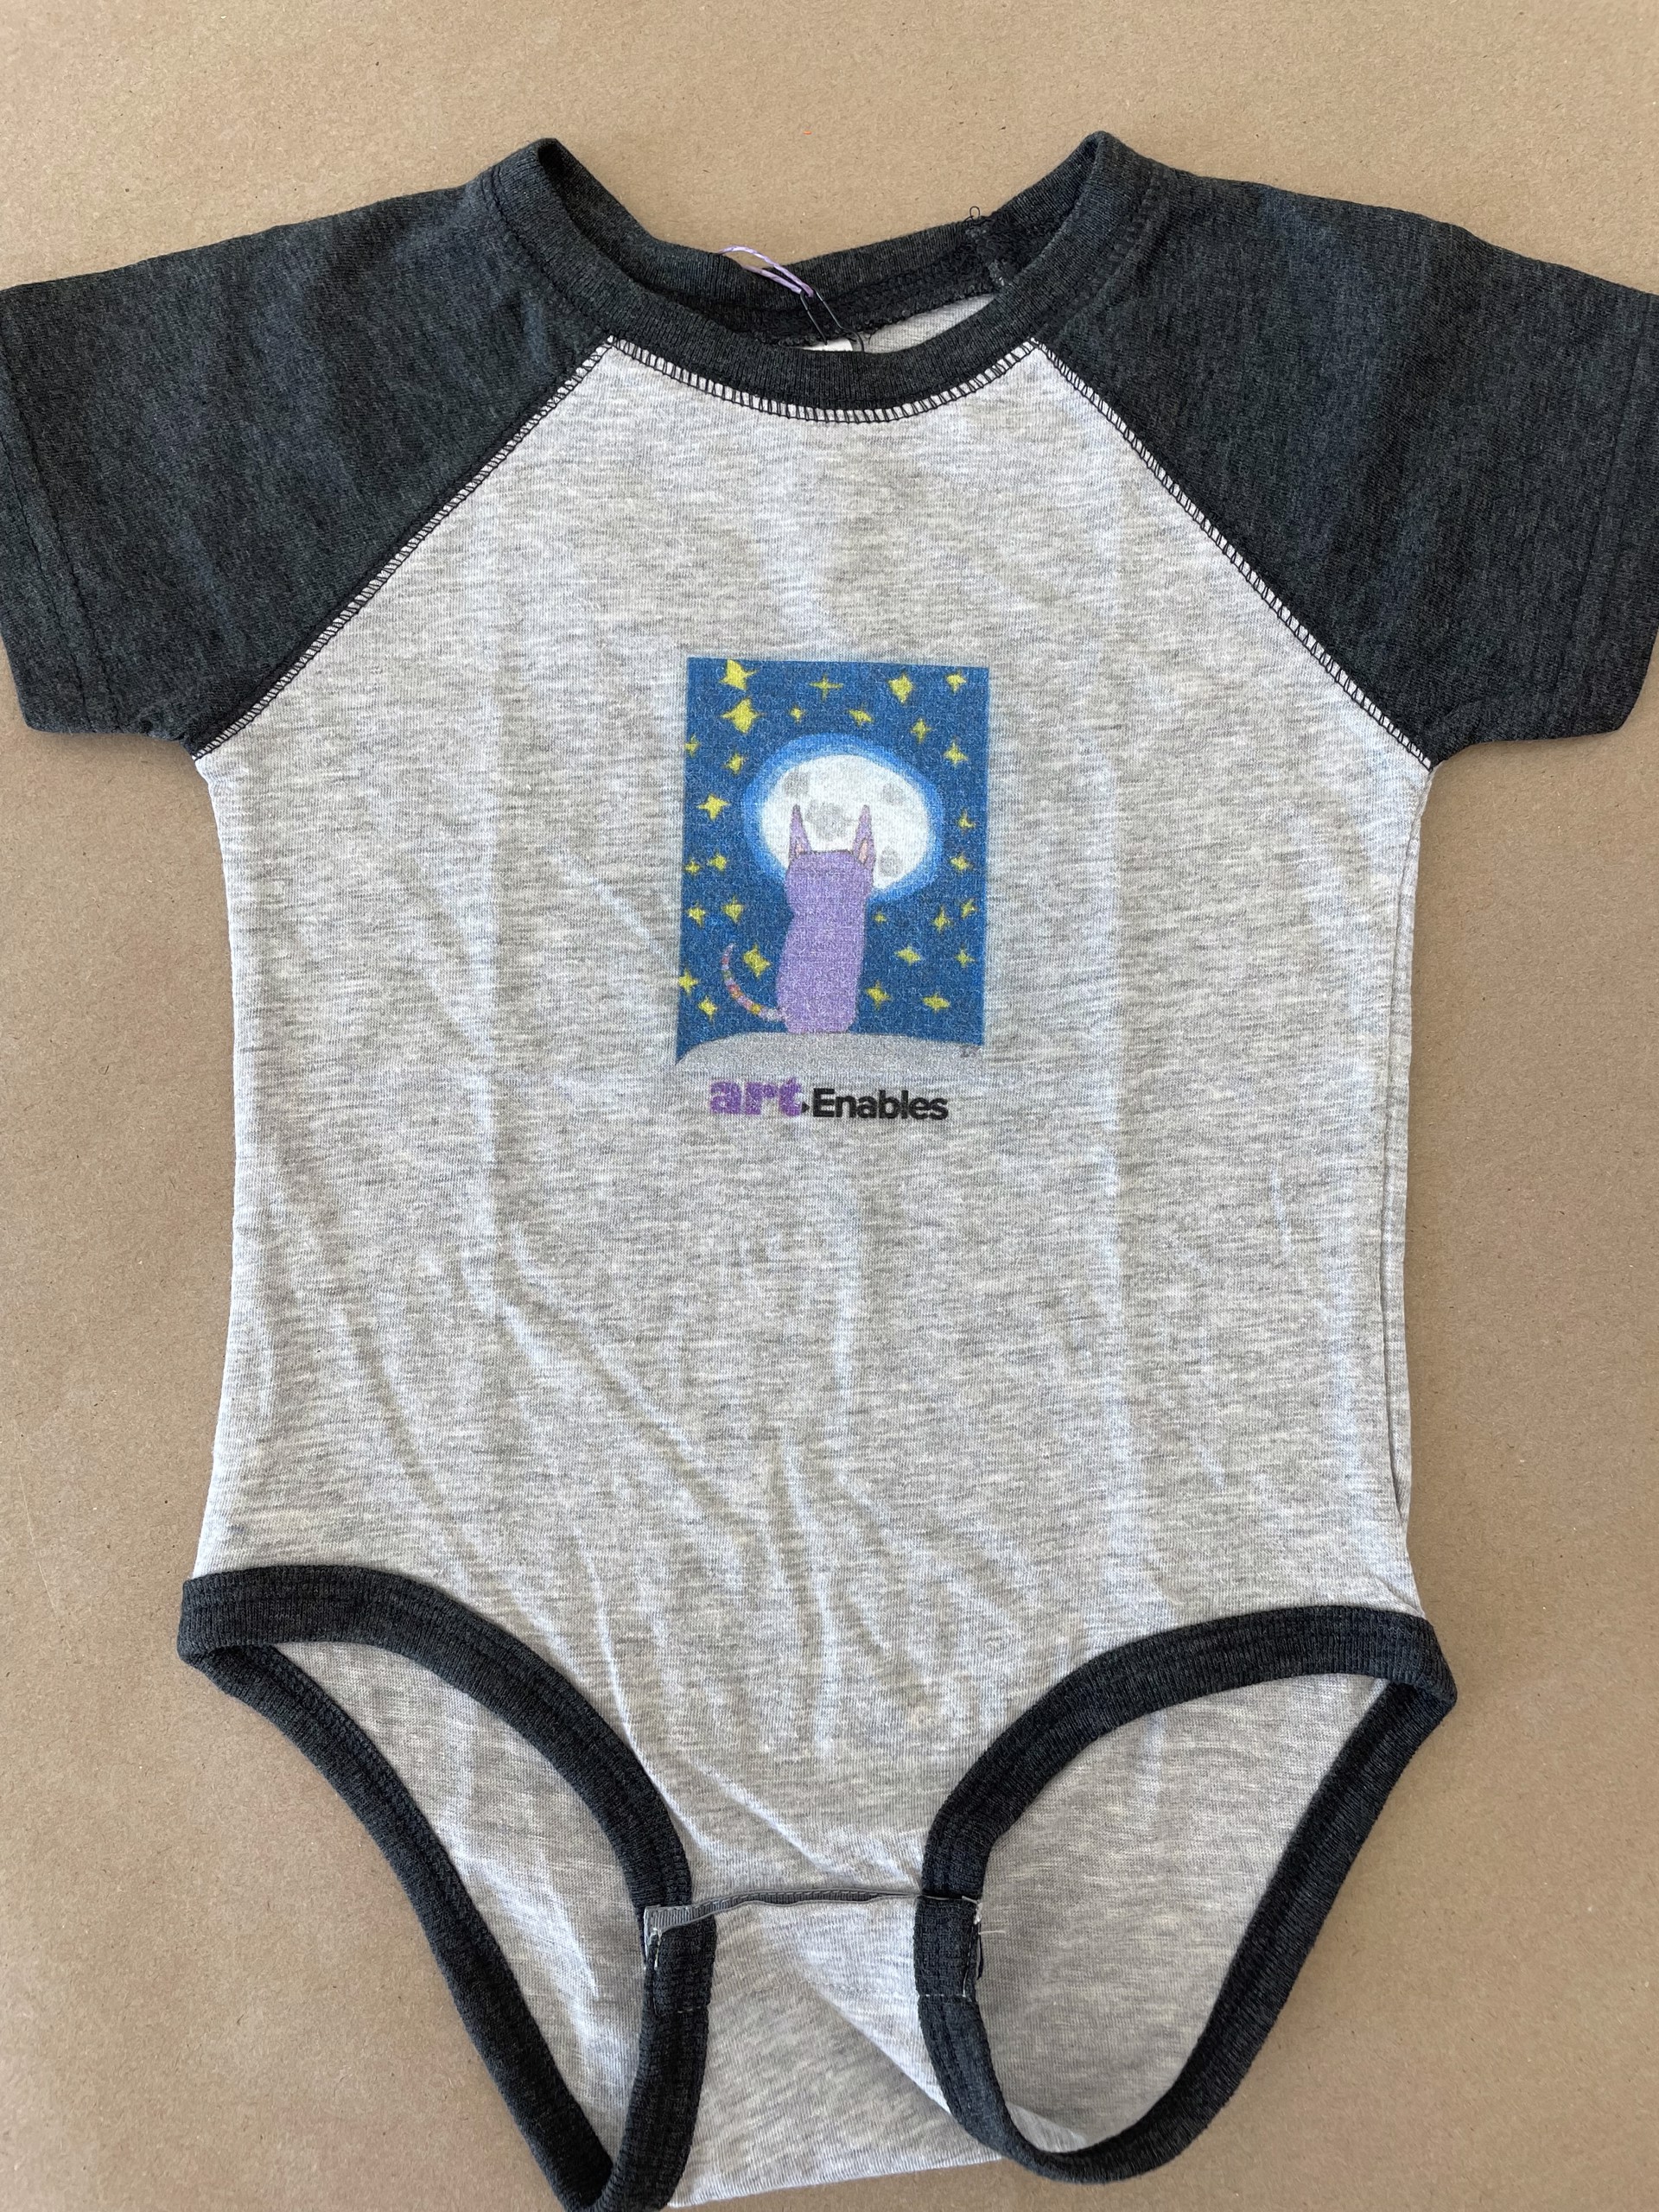 Baby Baseball Onesie (artwork by Imani Turner) 18 mo - charcoal heather gray by Art Enables Merchandise